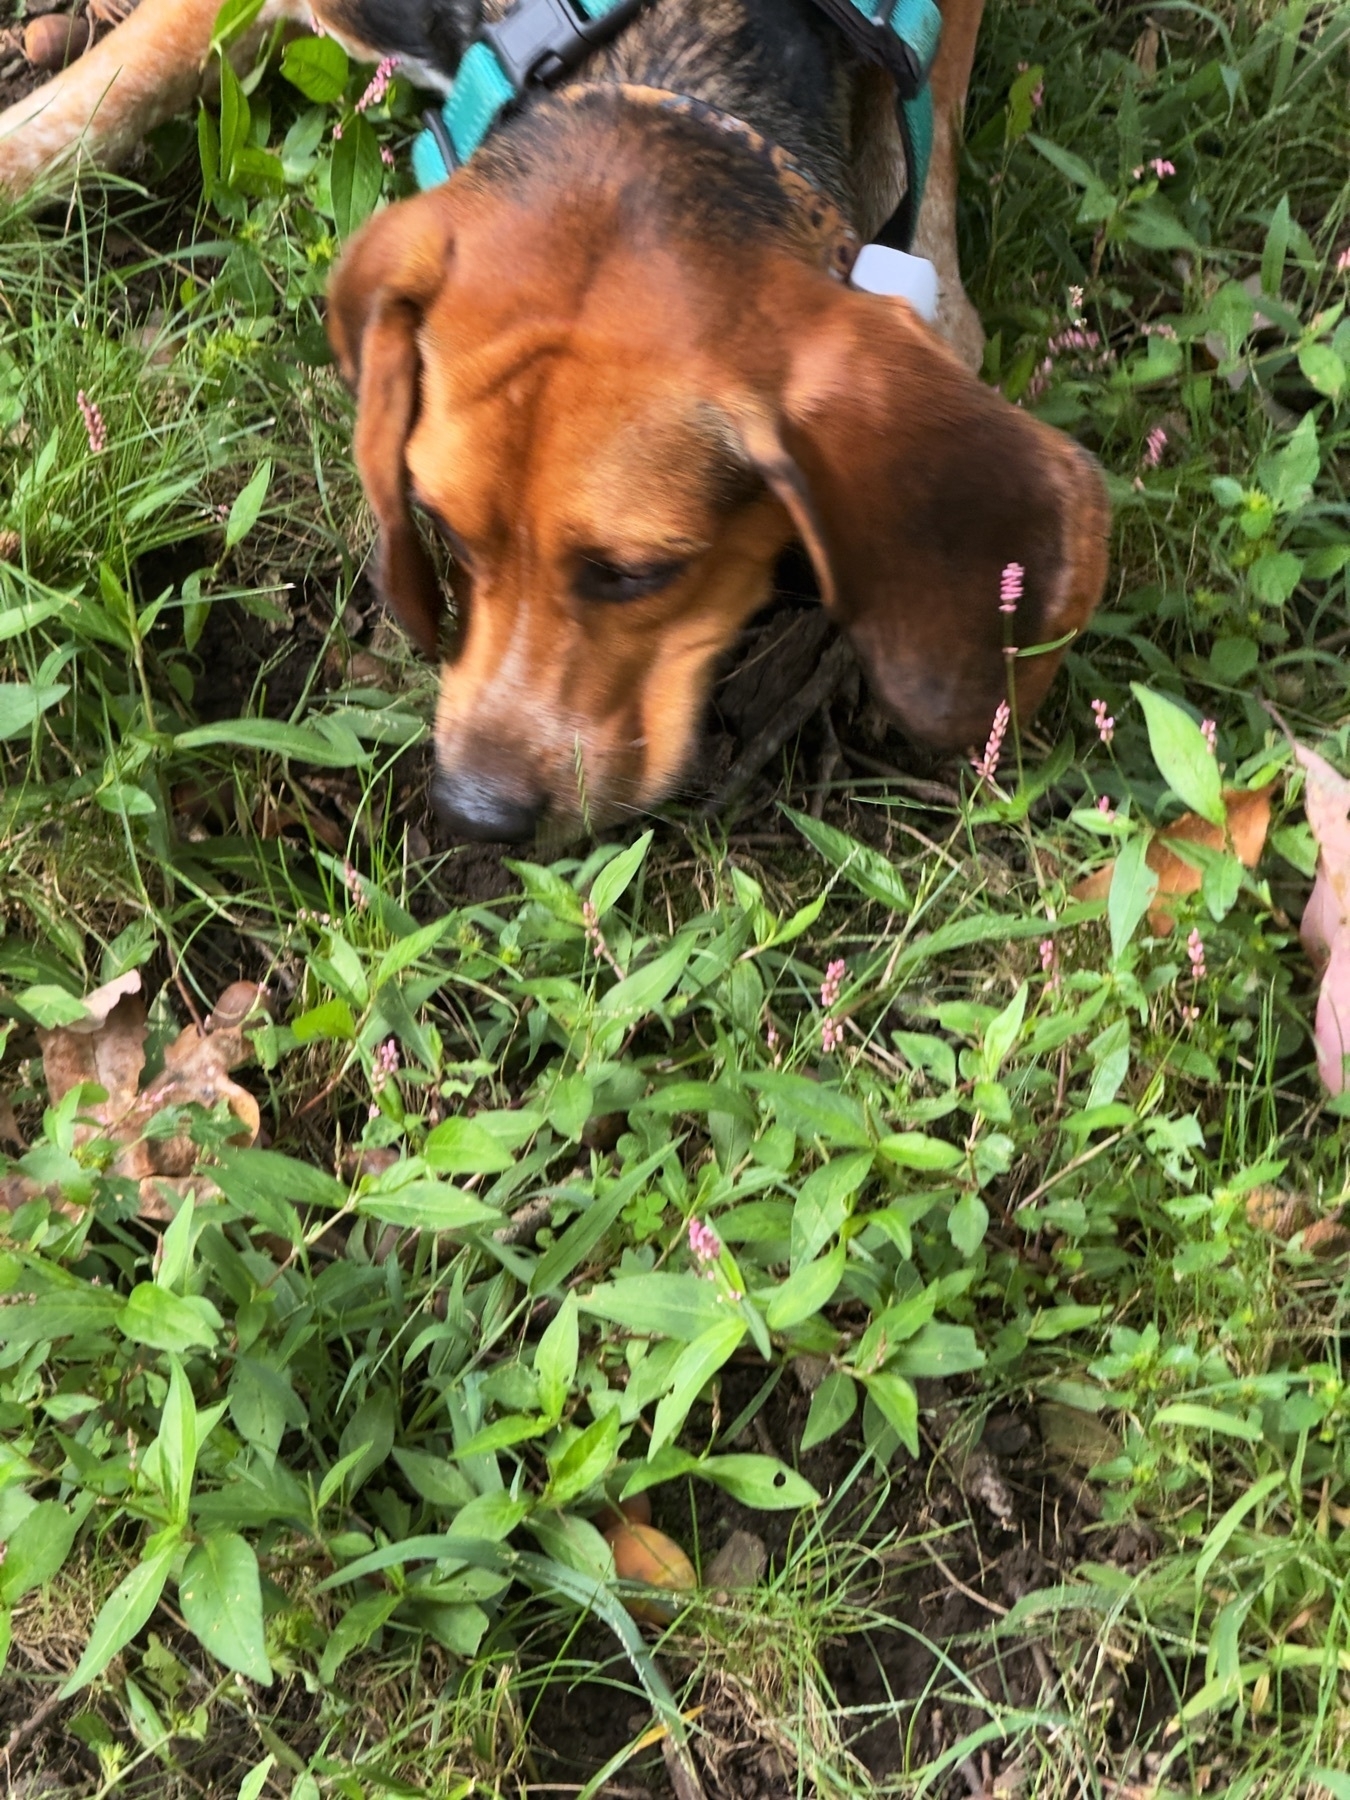 Scooby (red tick beagle) sniffing around.